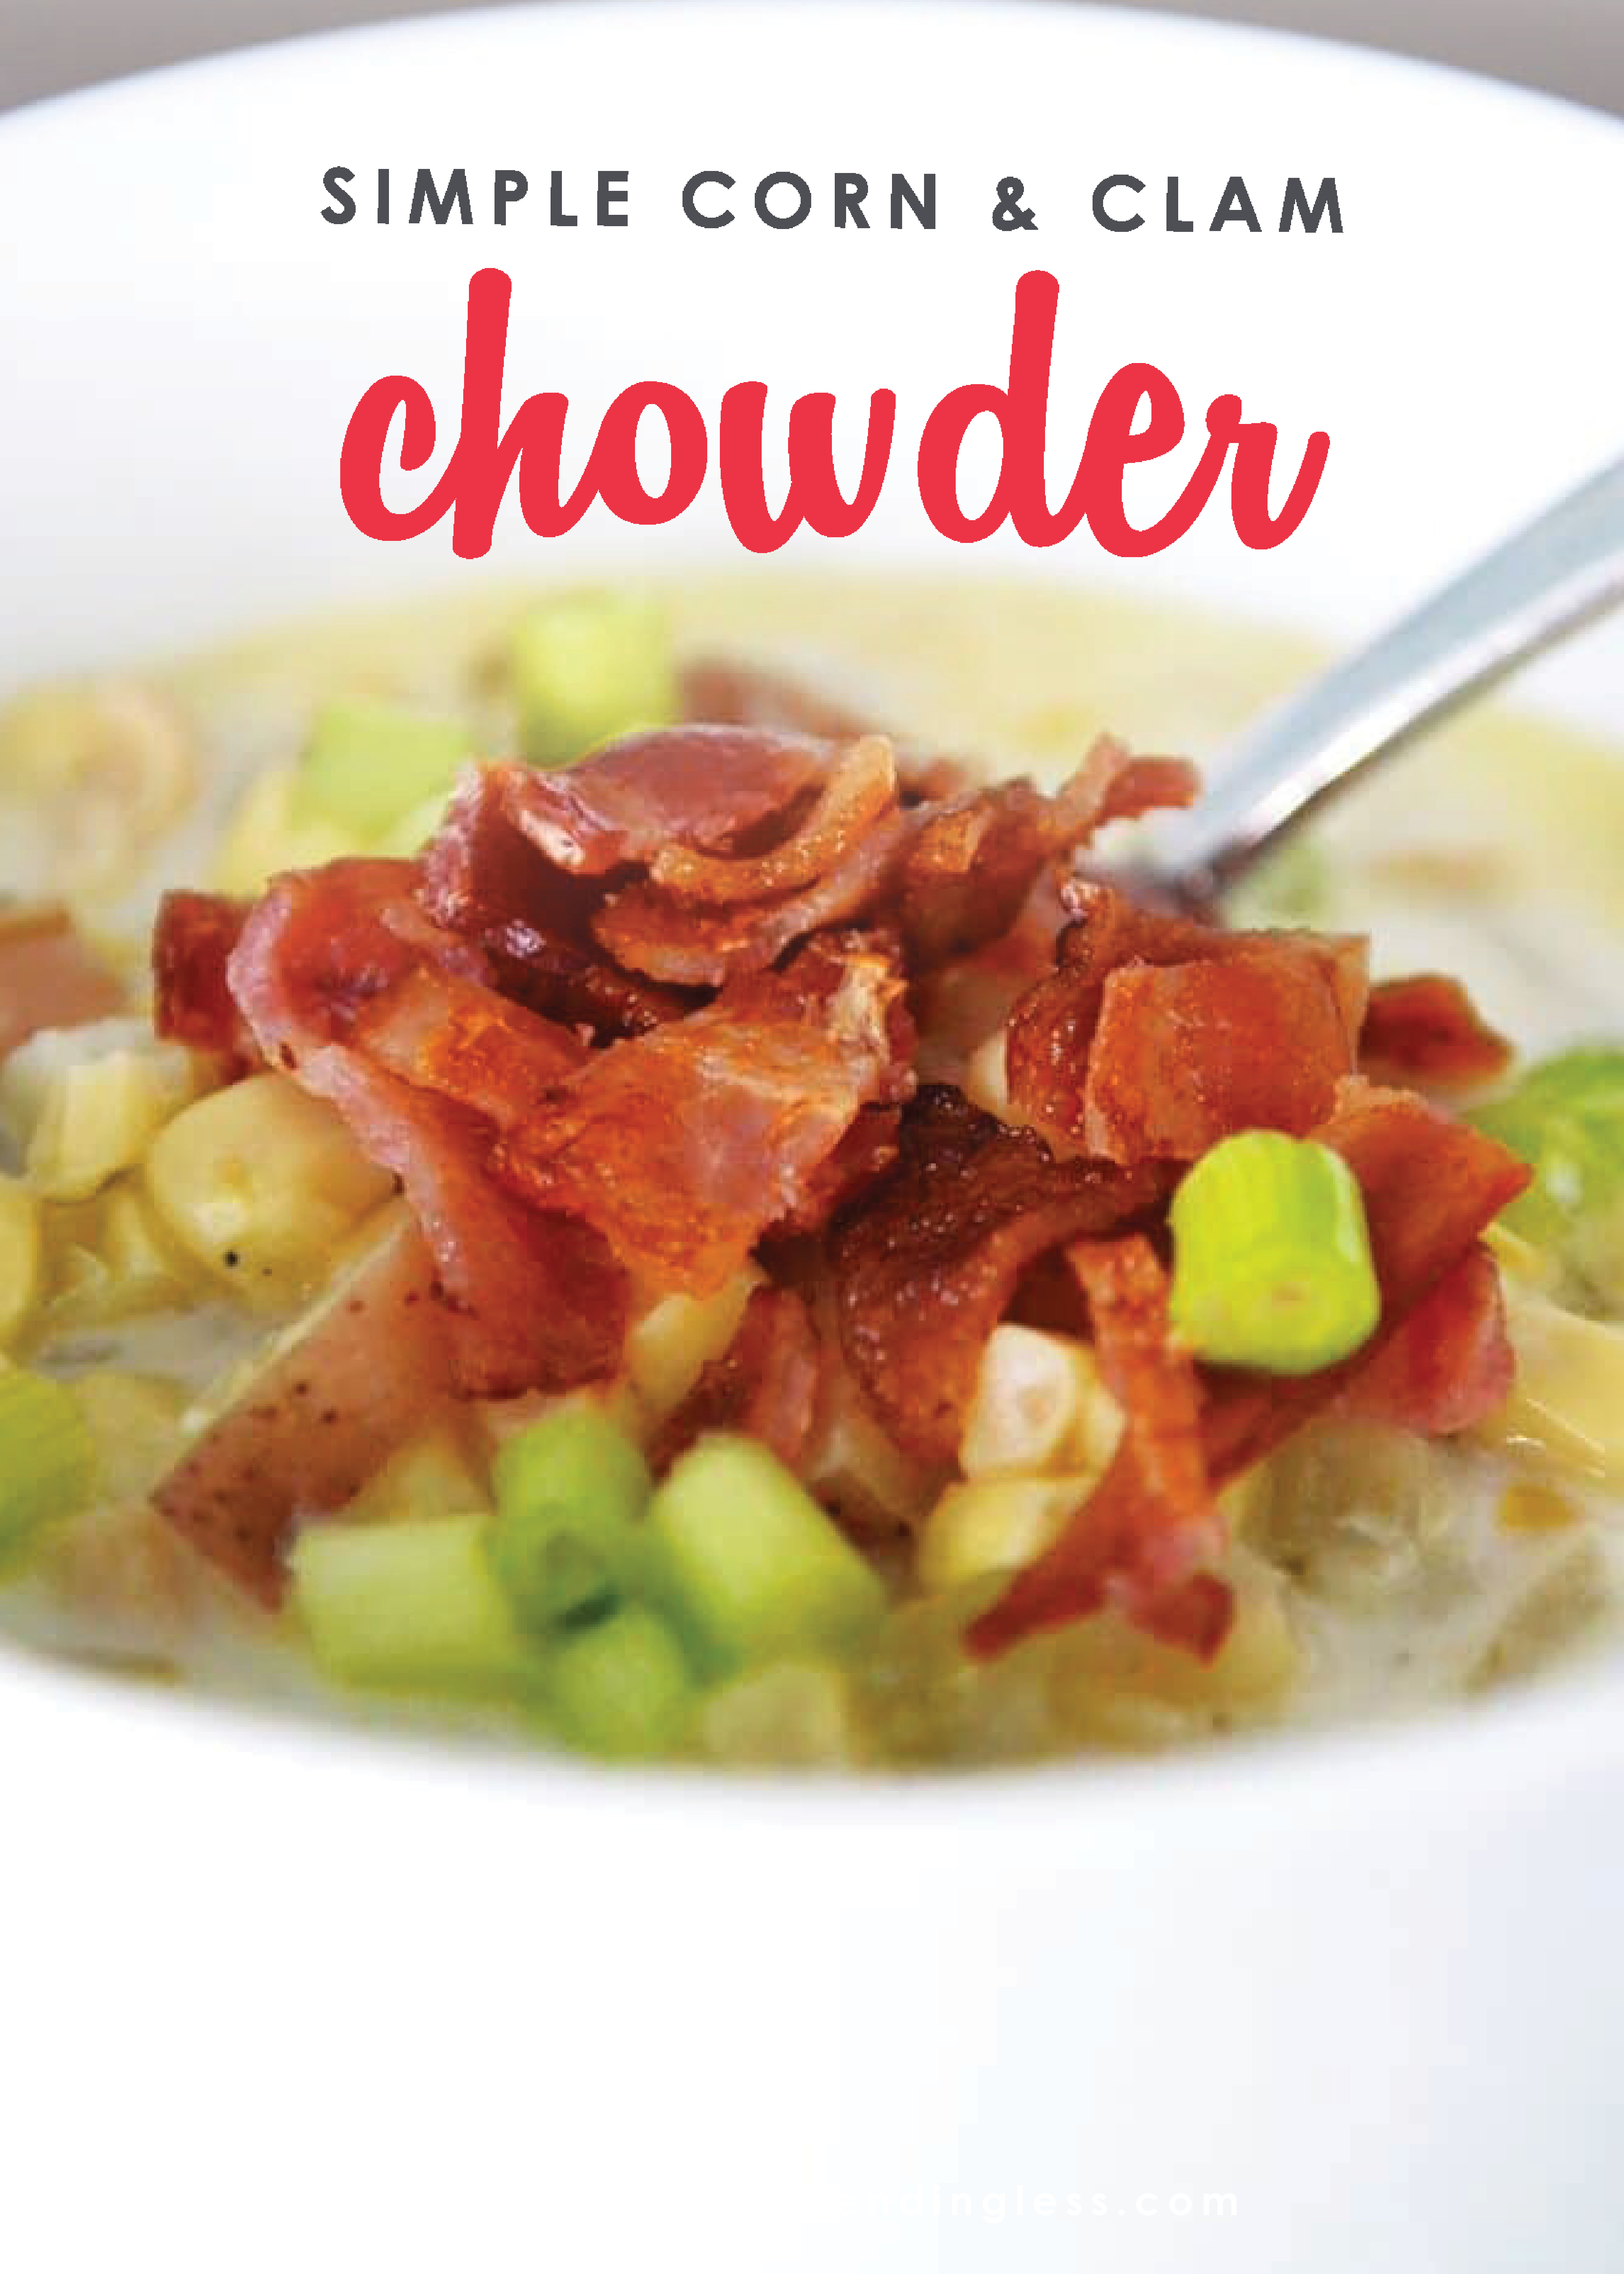 Need a go-to soup you can enjoy year round? This flavor-packed Corn & Clam Chowder comes together in minutes then goes straight from the freezer to crockpot for a simple but hearty meal that is ready when you are. My family gave this one a 10--I'm pretty sure yours will too! 